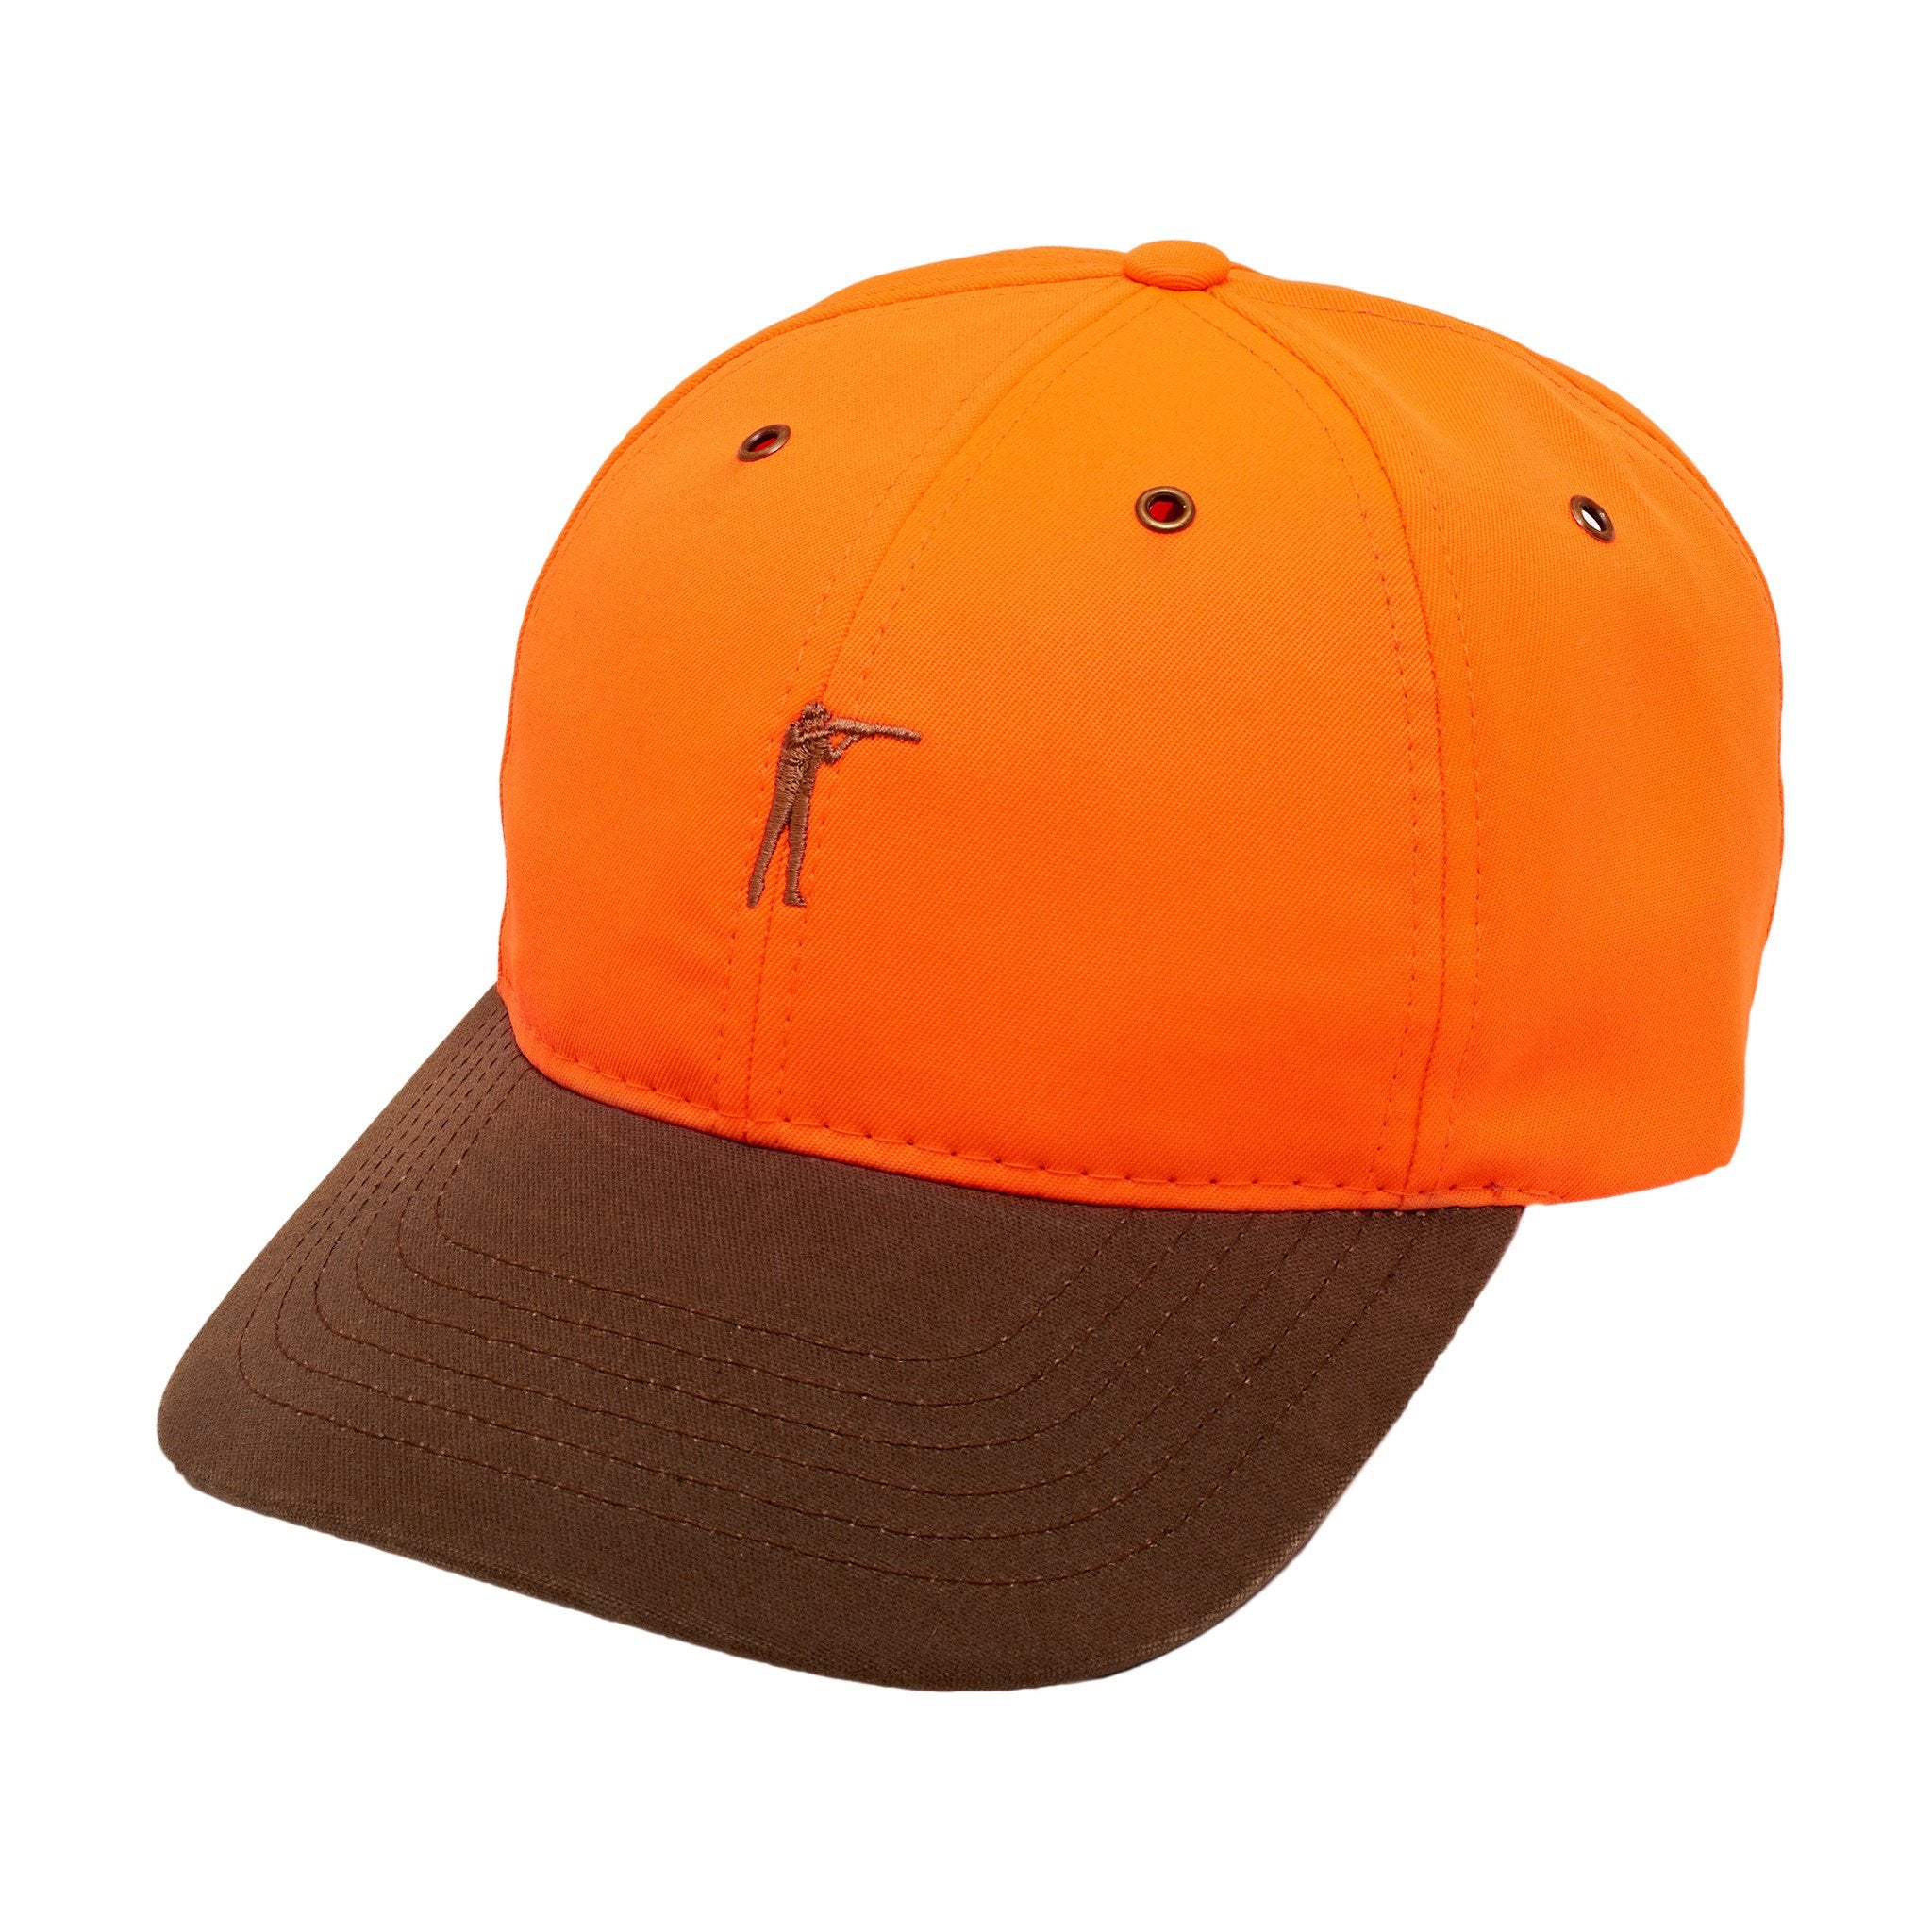 The Upland Hat